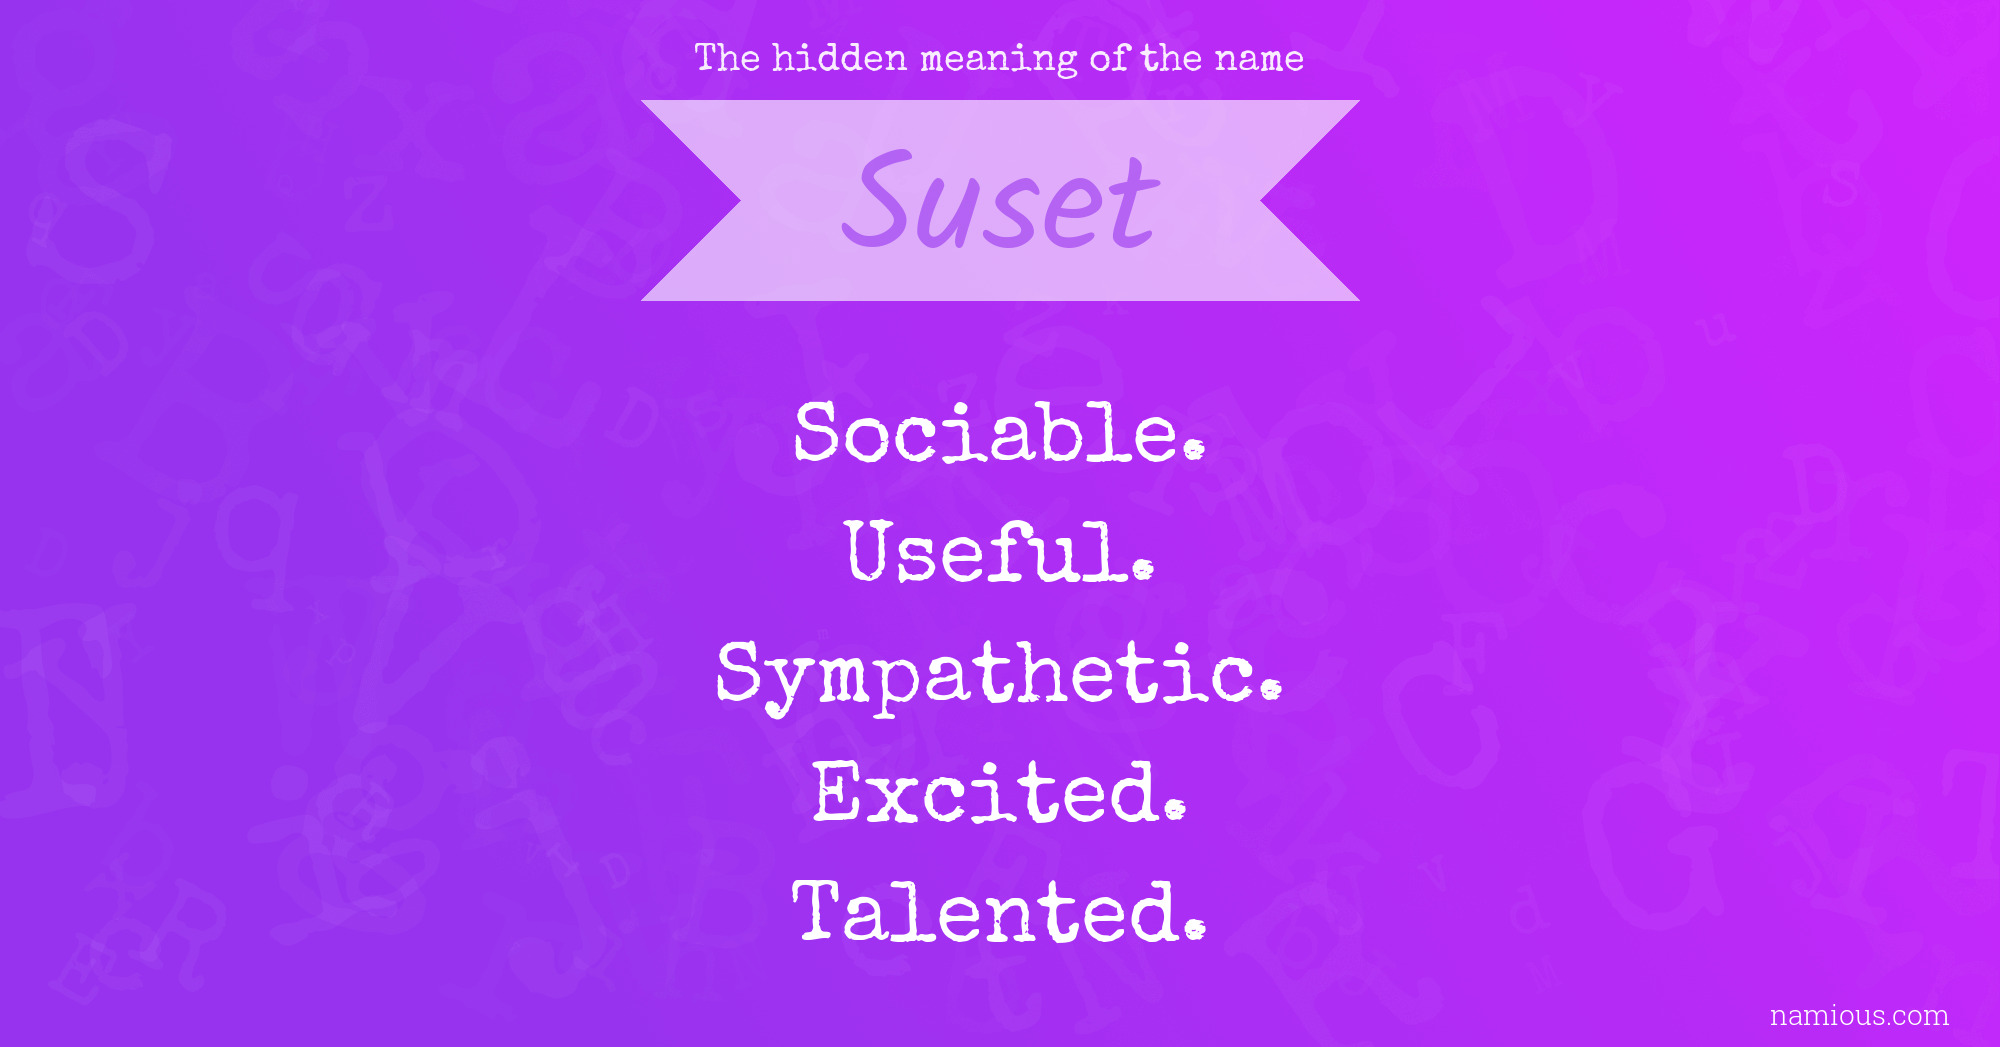 The hidden meaning of the name Suset